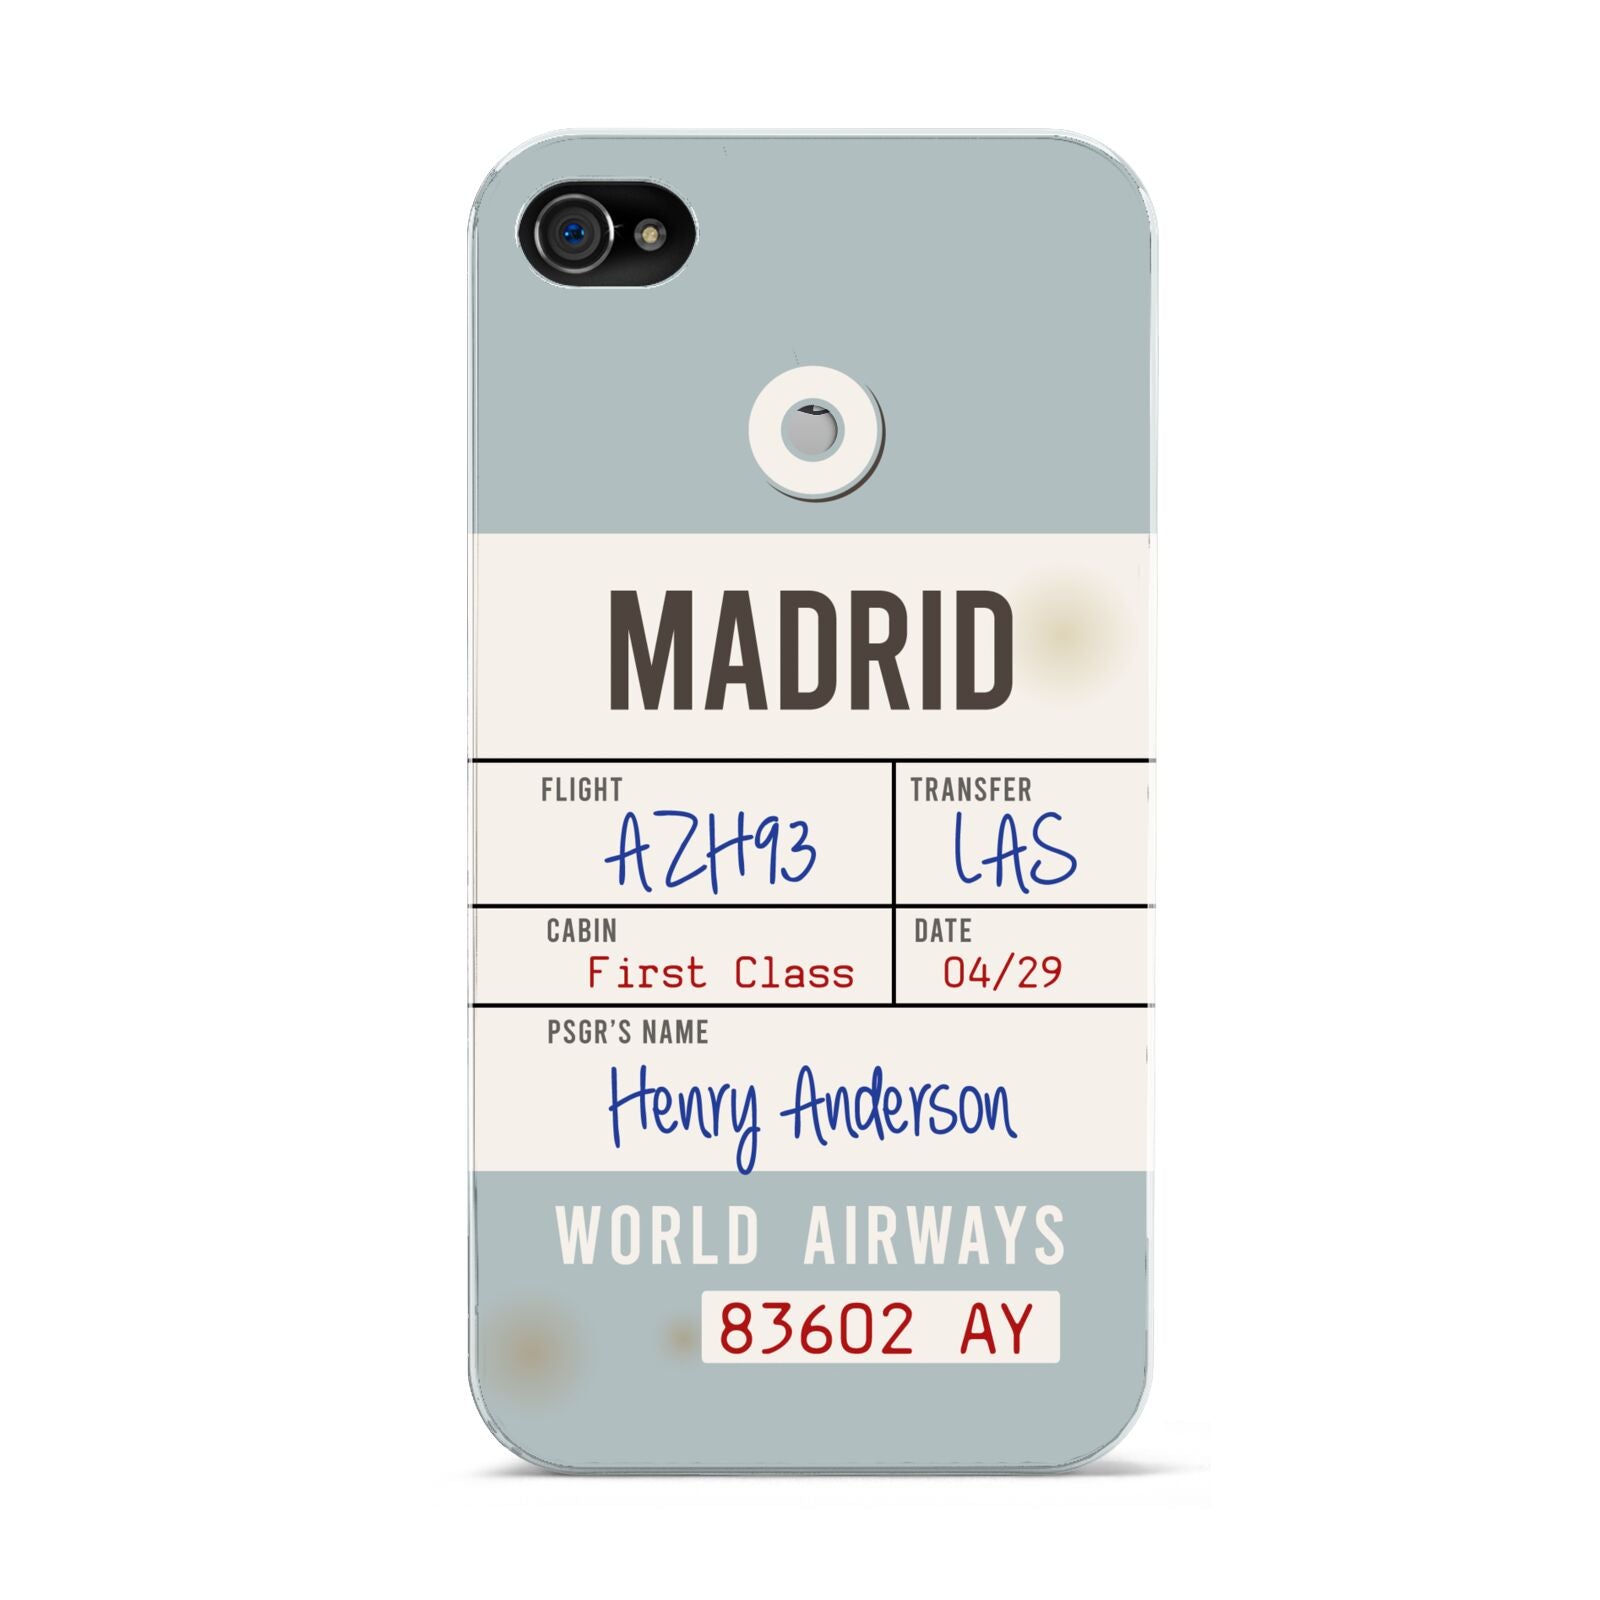 Baggage Tag Apple iPhone 4s Case